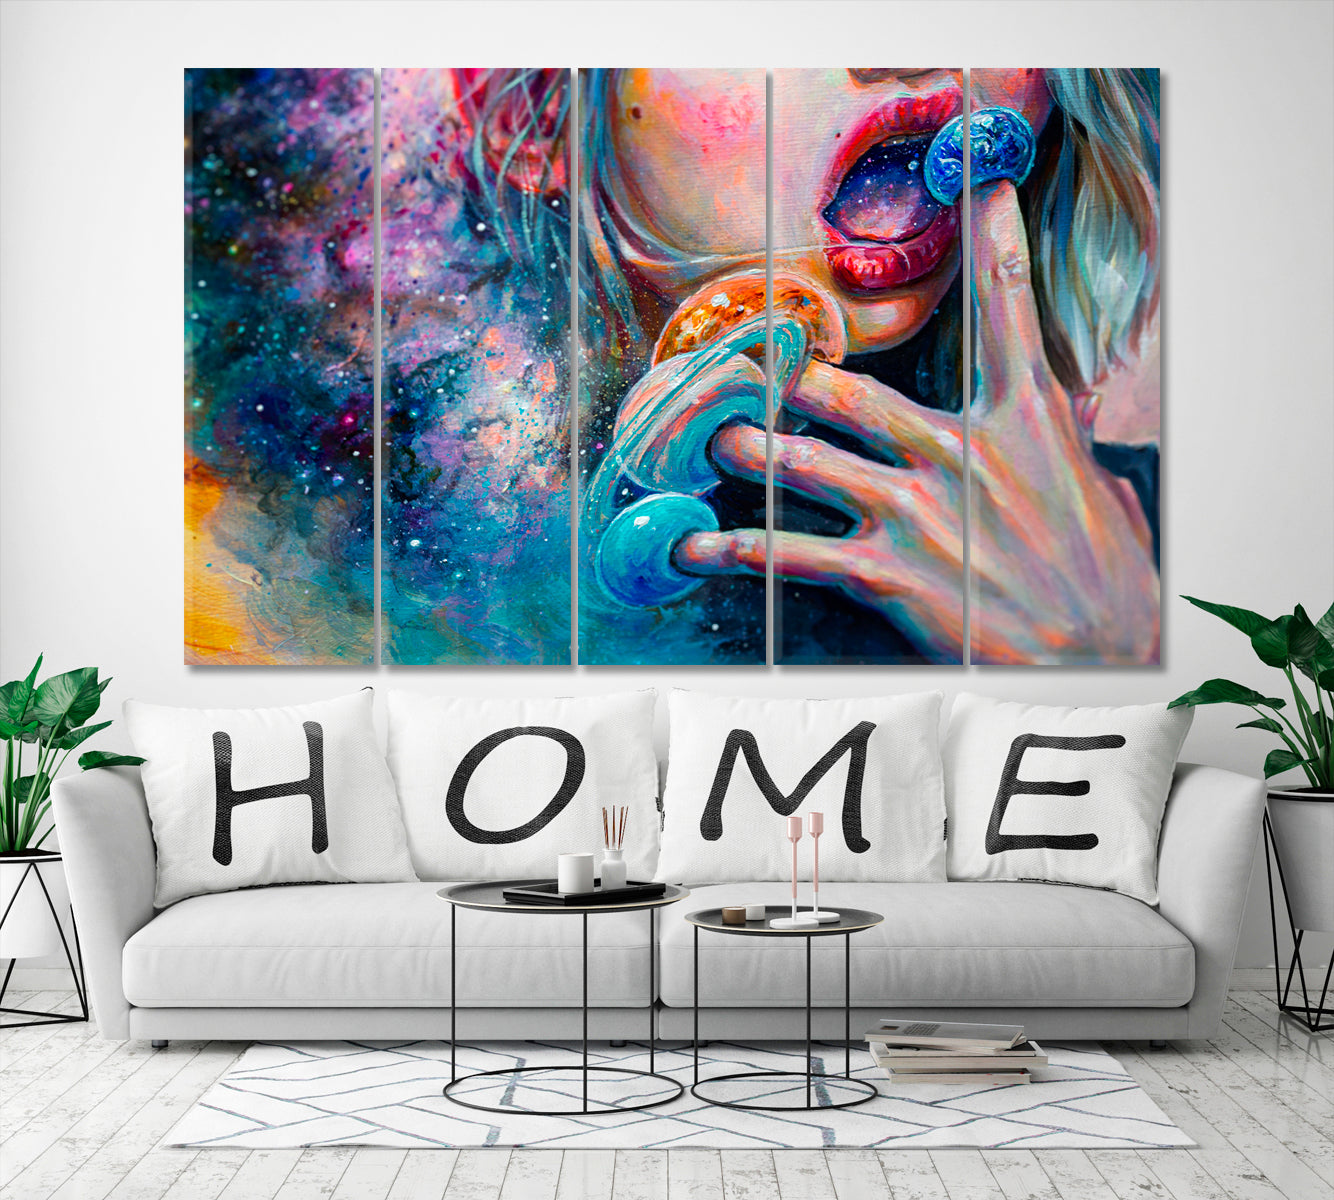 PLANET CREATIONS Trendy Abstract Surreal Psychedelic Mystic Space Surreal Fantasy Large Art Print Décor Artesty 5 panels 36" x 24" 